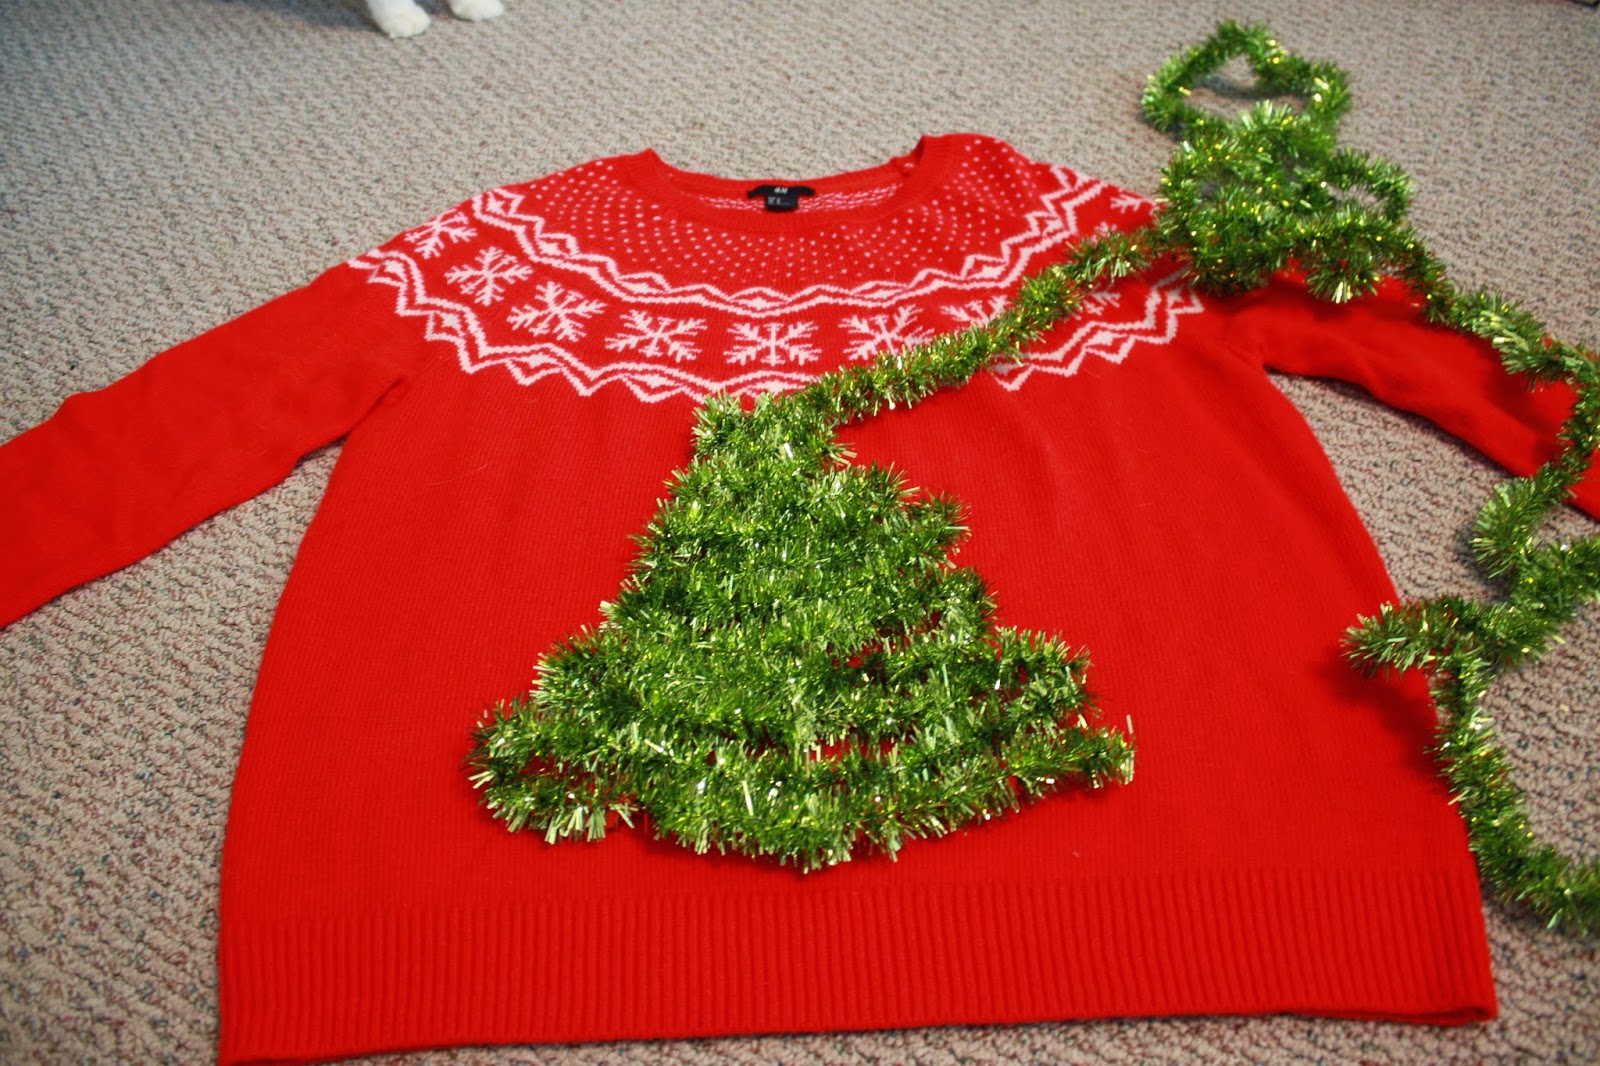 of life and style: Happy Holly Days: DIY Ugly Christmas Sweater